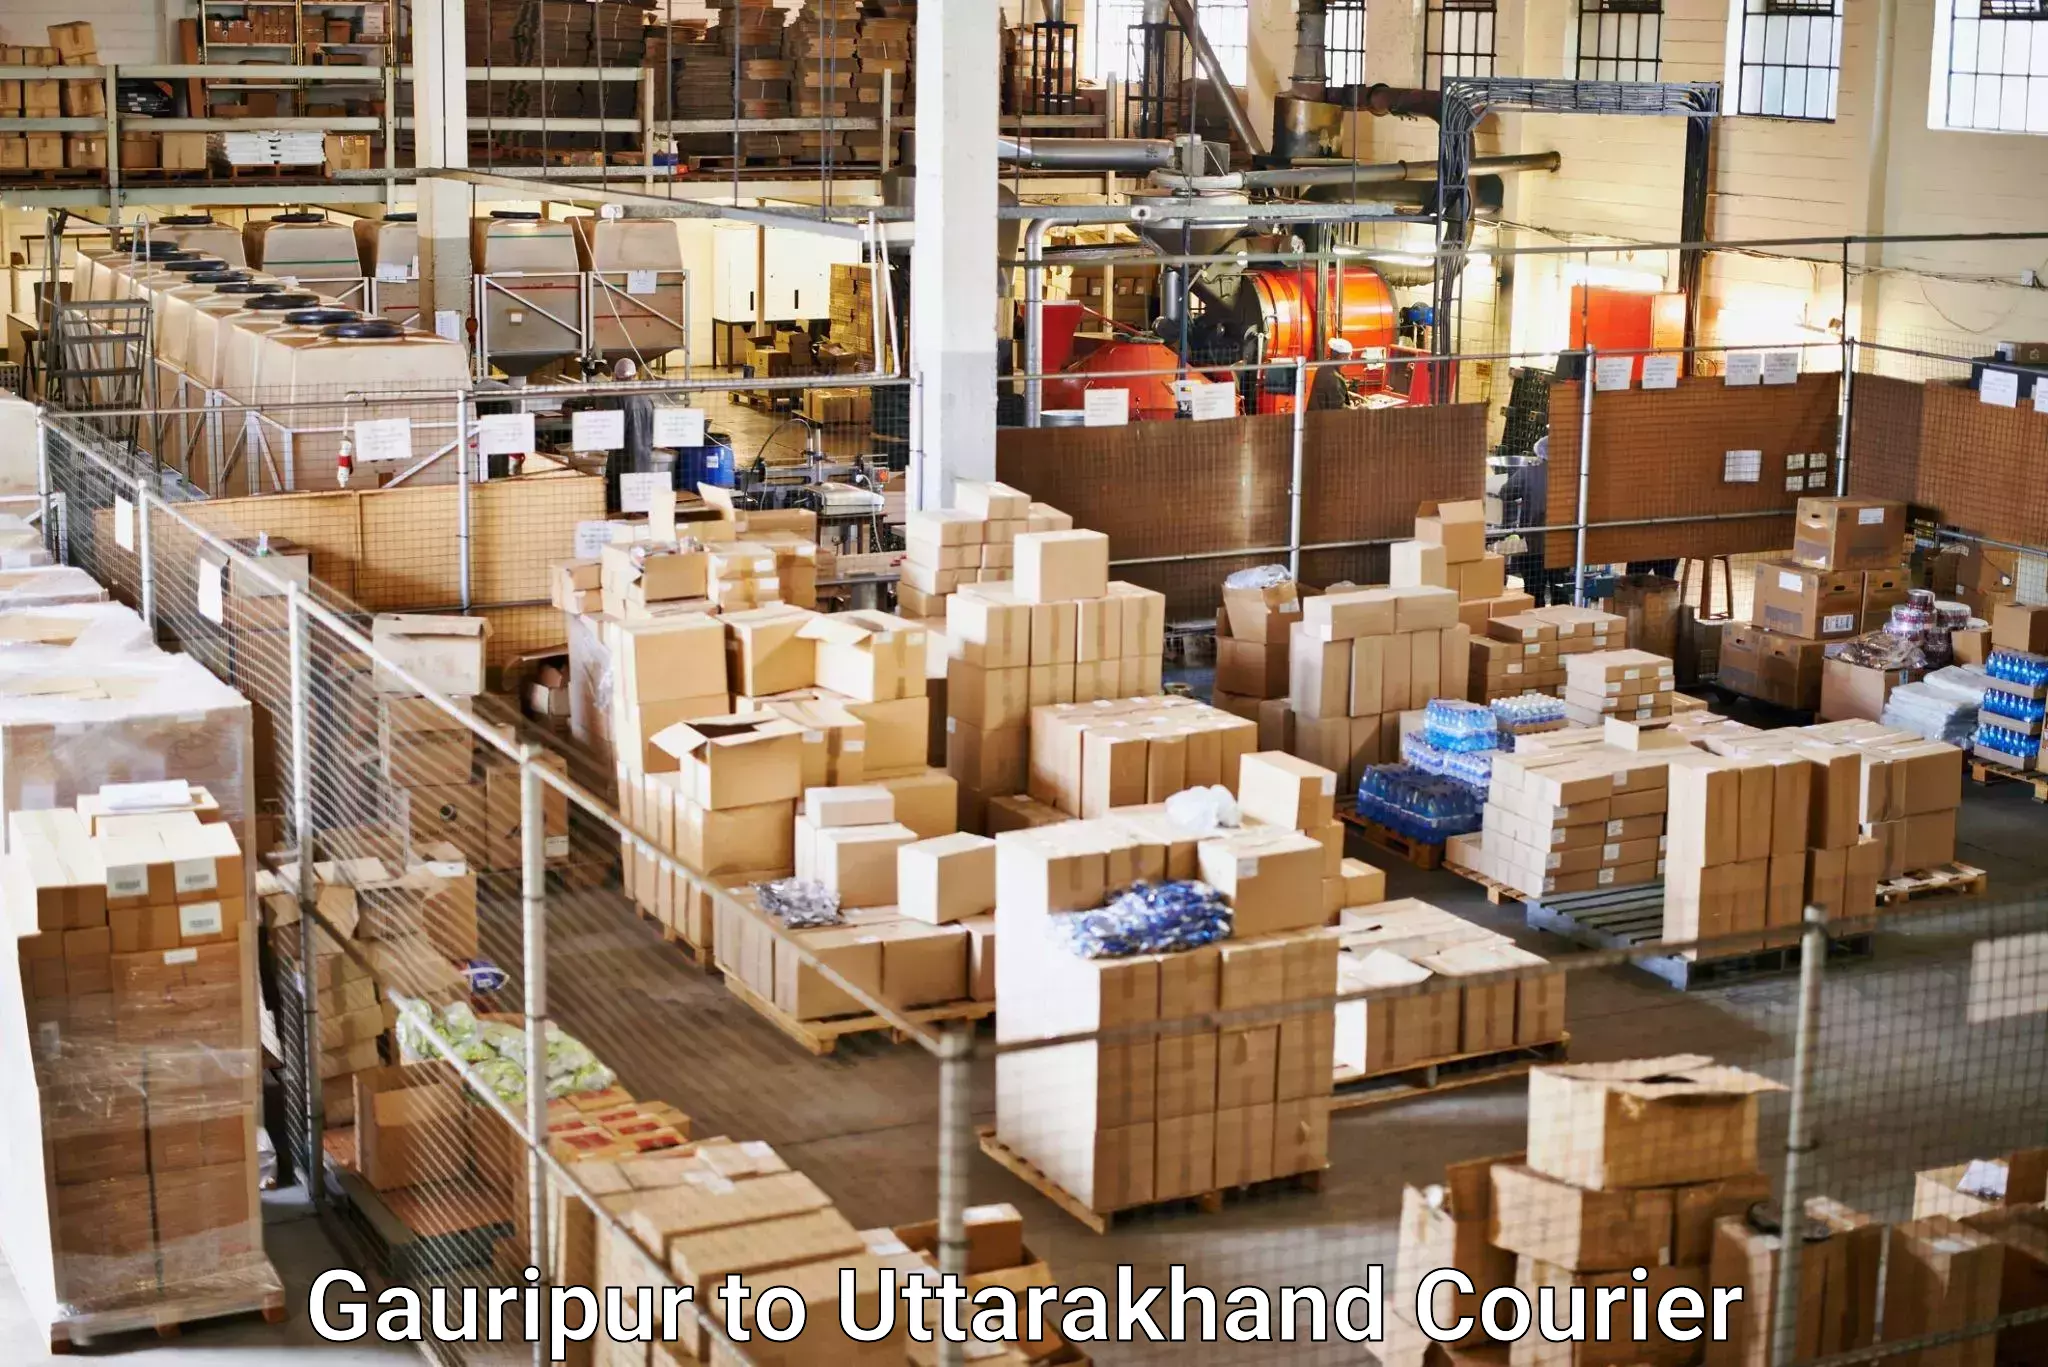 Same-day delivery solutions Gauripur to Dehradun